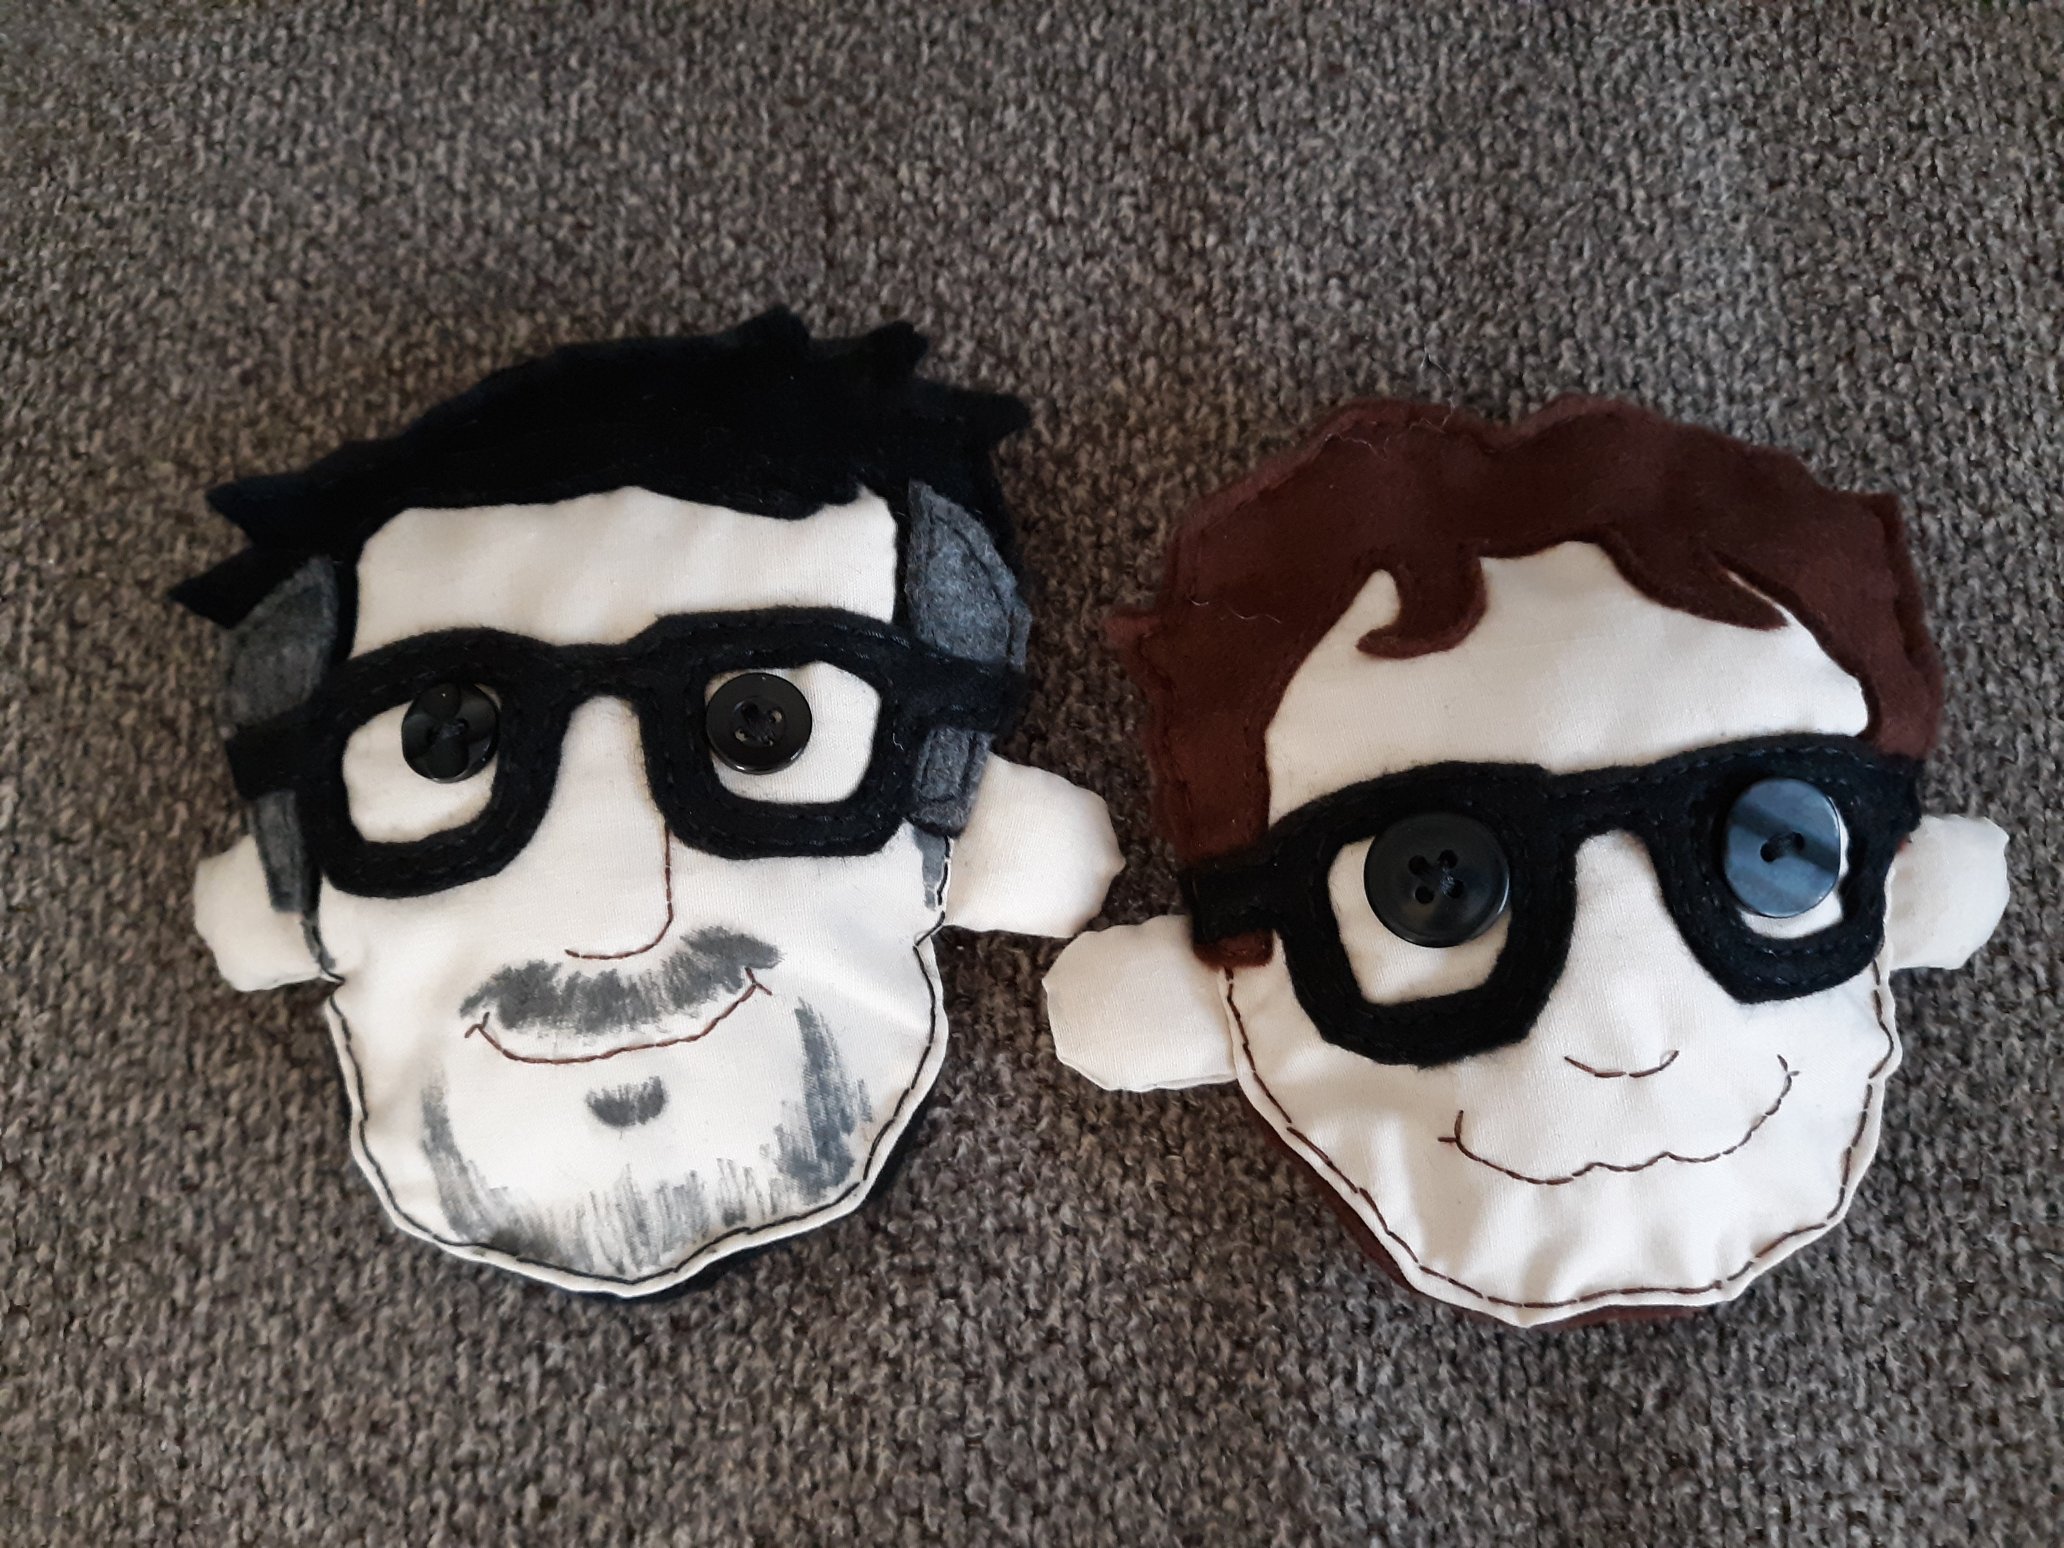 Two pins of the heads of John Flansburgh and John Linnell laying down on a couch. Their hair and glasses are made of felt, their skin is made of polyester cotton, and their eyes are black buttons. Their noses and mouths were embroidered on. Flansburgh's facial hair was drawn on with a fabric marker.